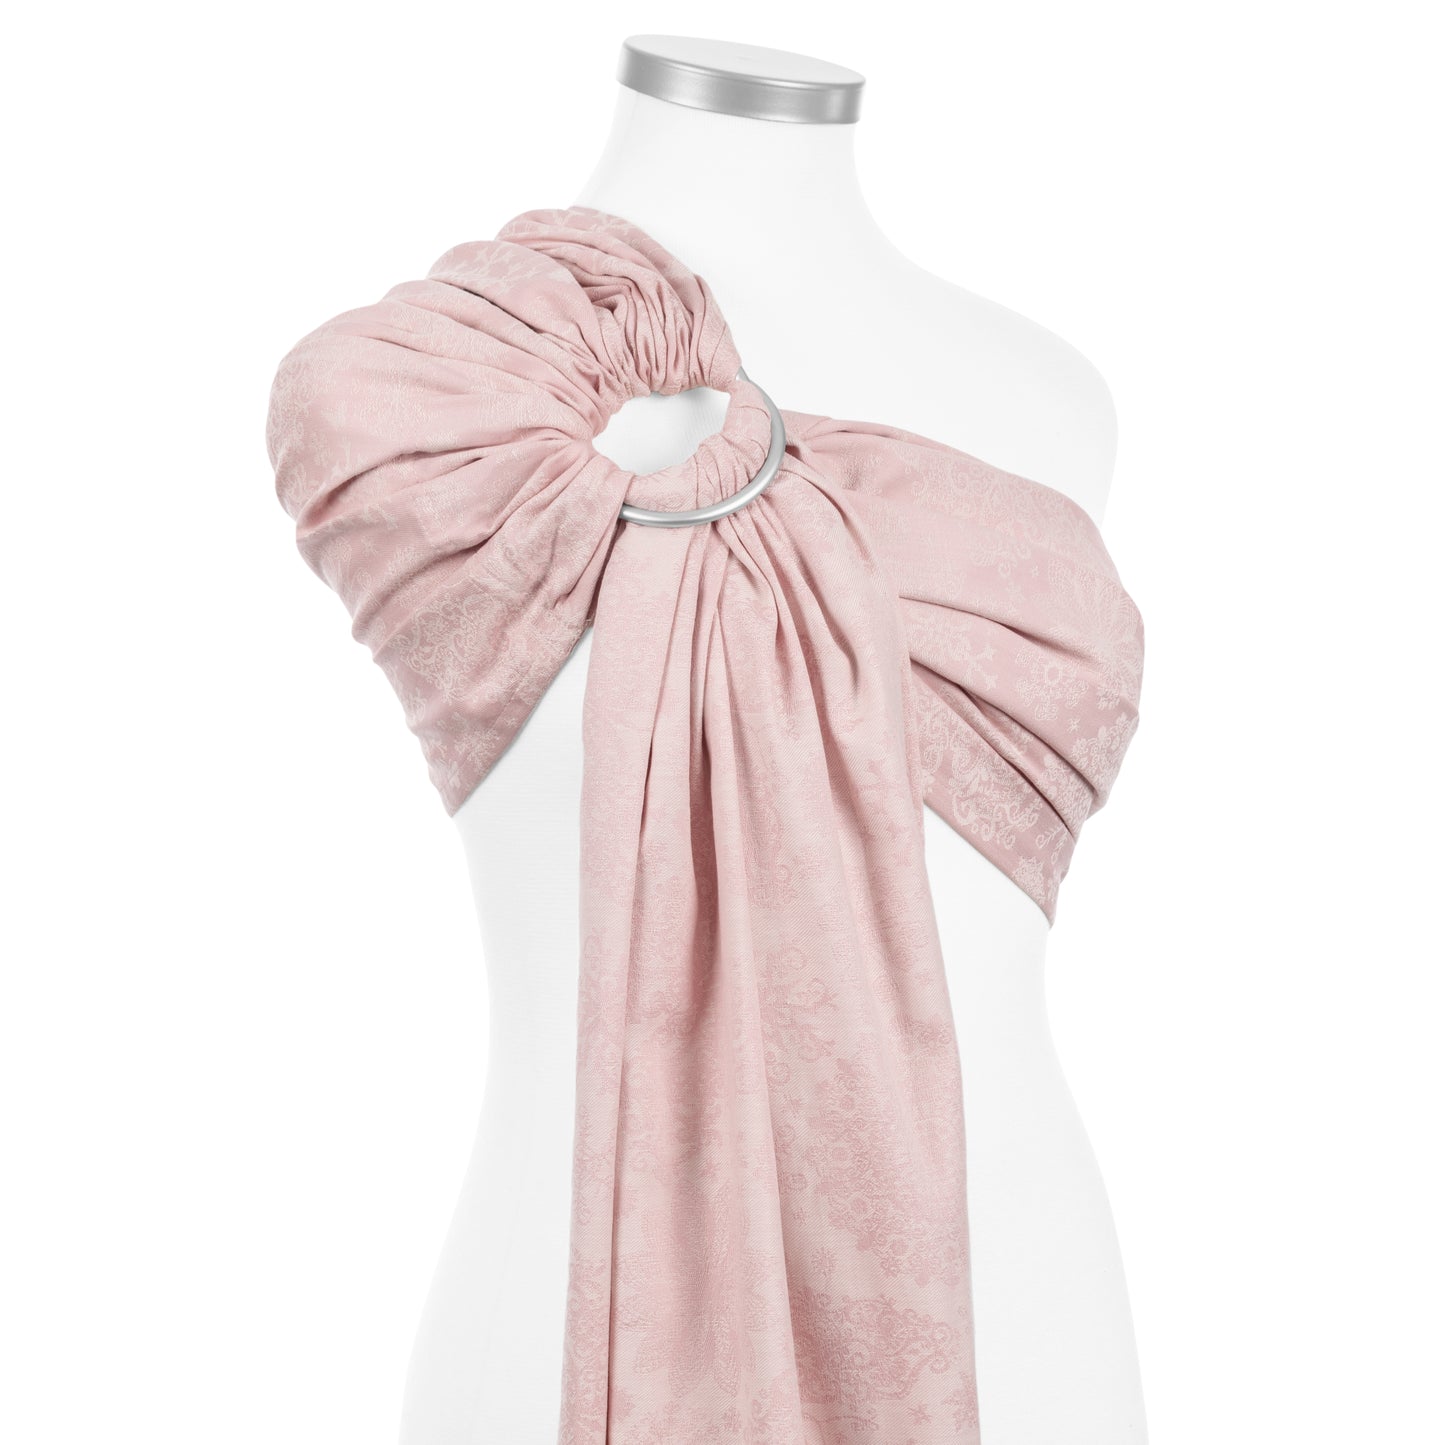 Ring Sling - Iced Butterfly - rosé